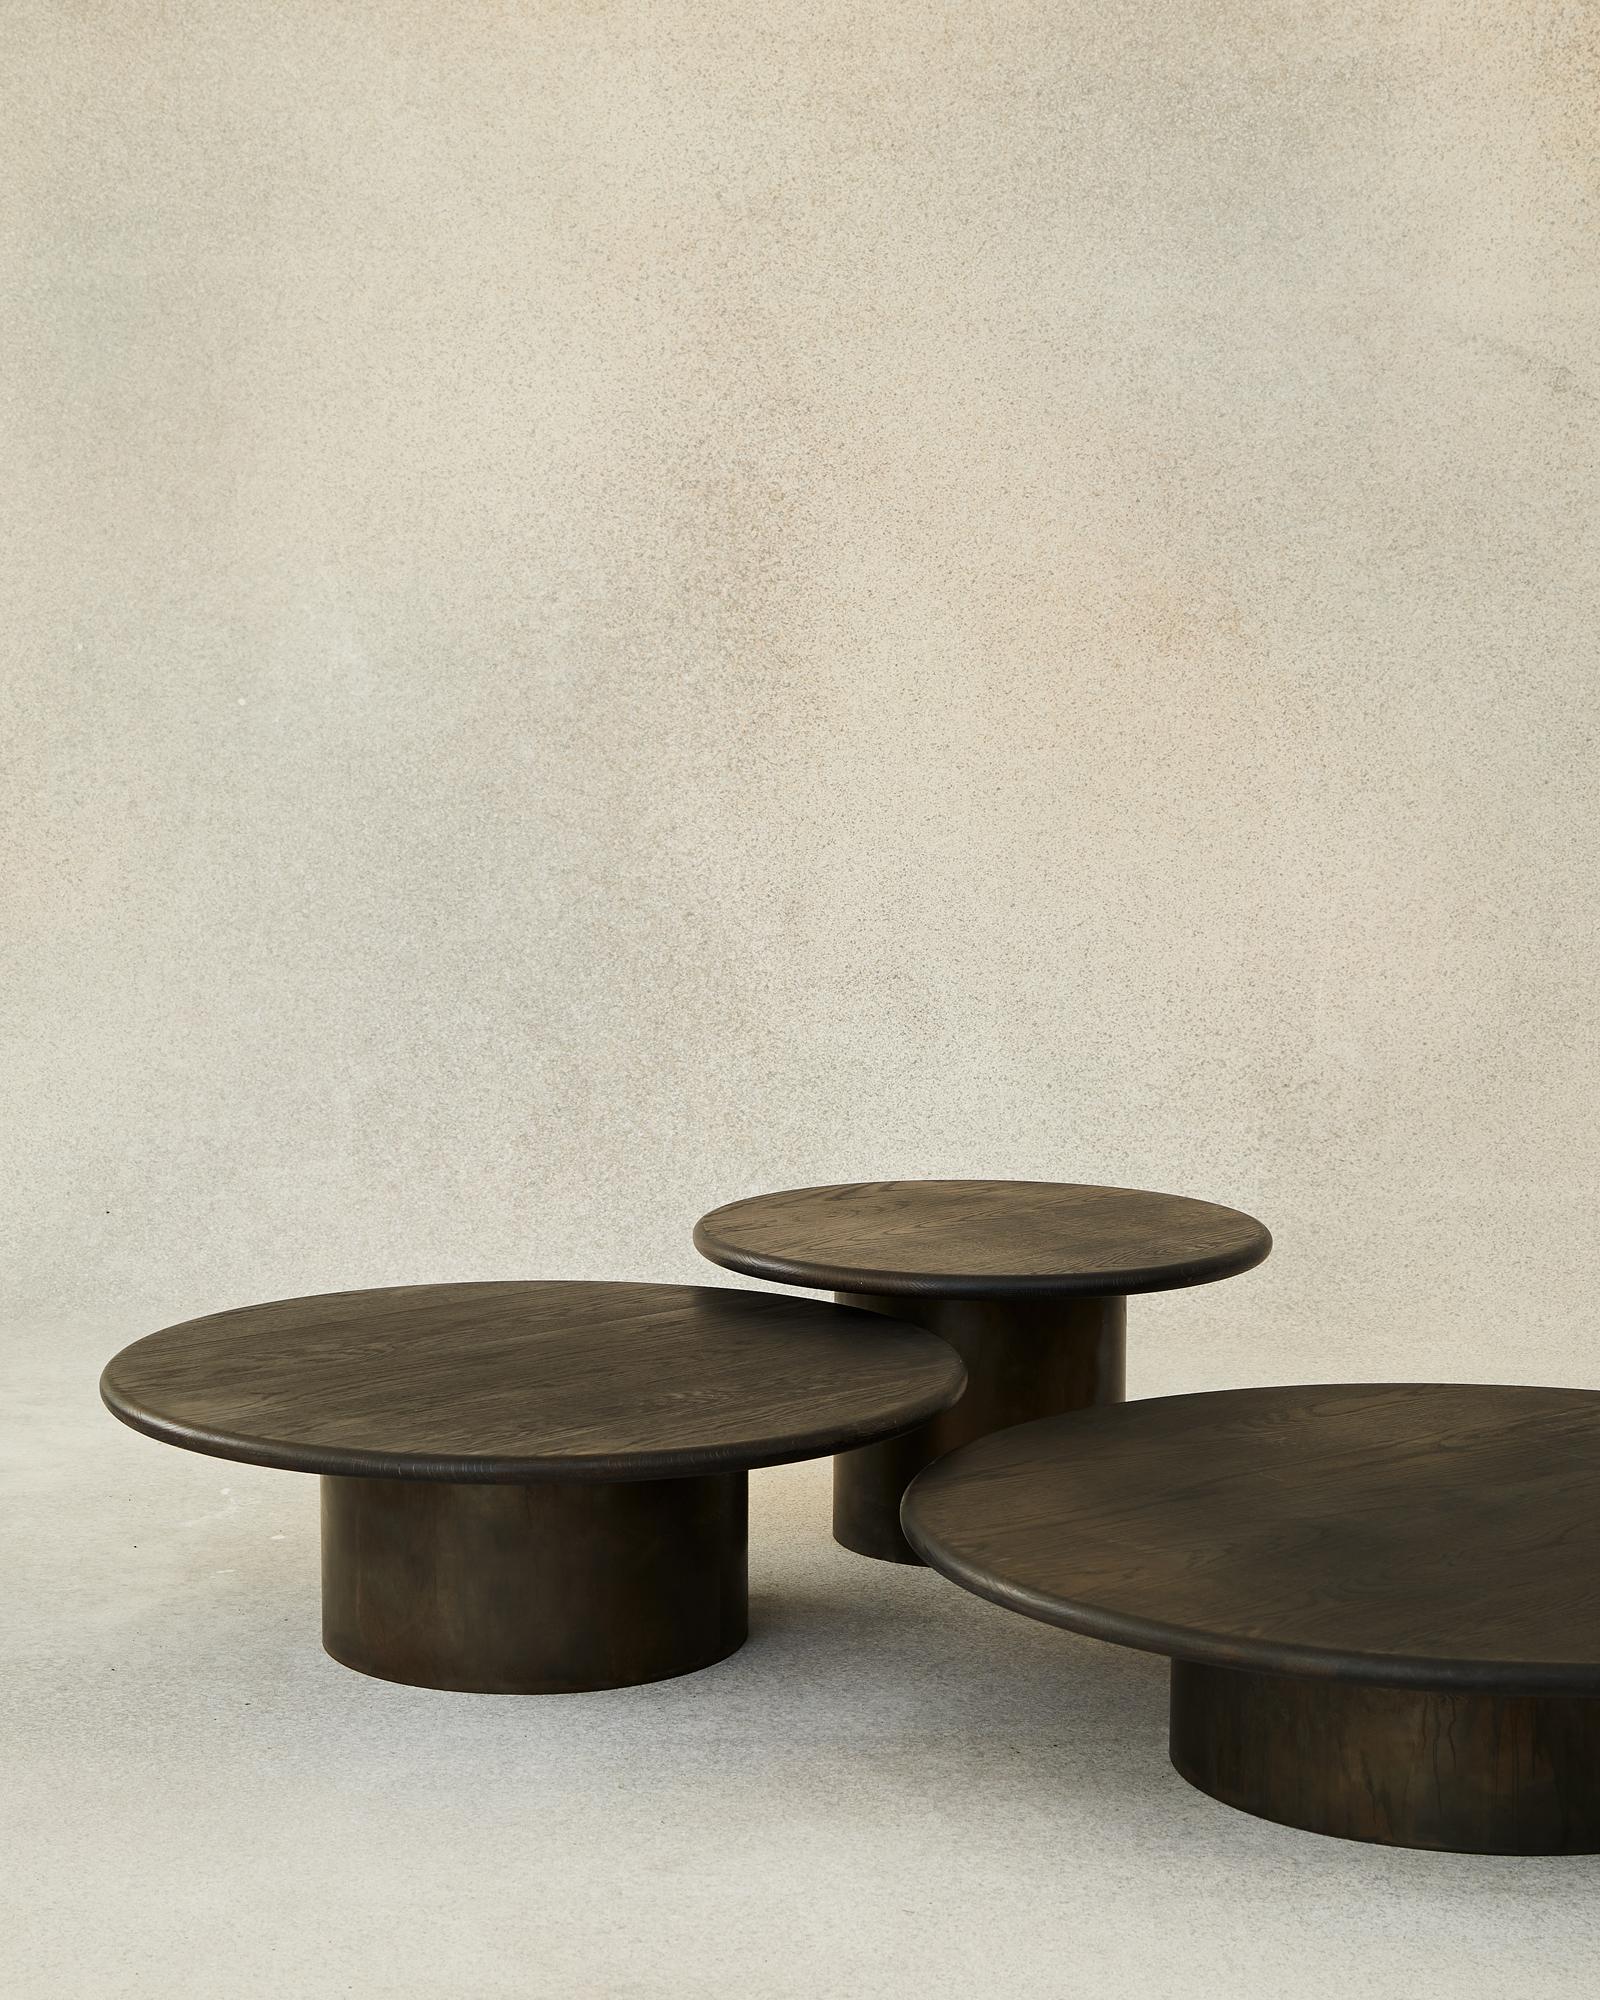 With their circular profiles, varying proportions and potential to be nested, these versatile tables evoke the pattern of raindrops in a pool of water when placed together.

Bought as a set of 600, 800, 1000, we add a 10% discount.

Tops: black